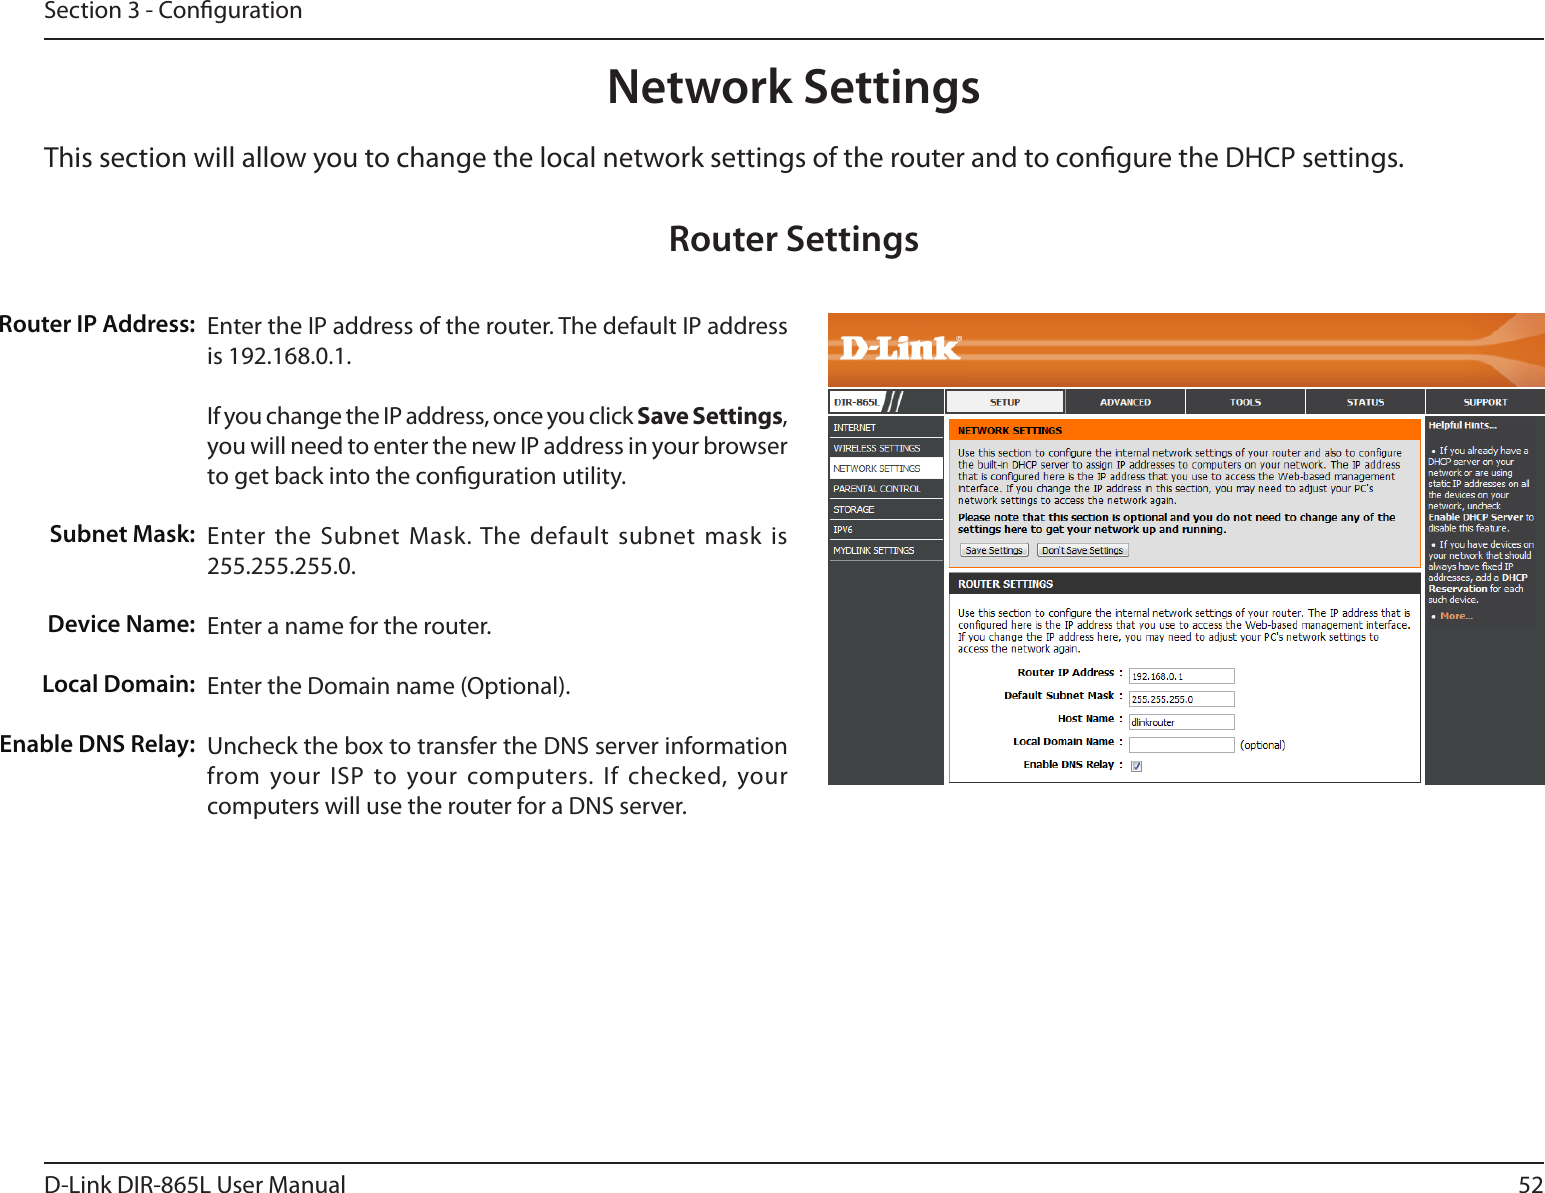 52D-Link DIR-865L User ManualSection 3 - CongurationThis section will allow you to change the local network settings of the router and to congure the DHCP settings.Network SettingsEnter the IP address of the router. The default IP address is 192.168.0.1.If you change the IP address, once you click Save Settings, you will need to enter the new IP address in your browser to get back into the conguration utility.Enter the Subnet  Mask. The default subnet mask  is 255.255.255.0.Enter a name for the router.Enter the Domain name (Optional).Uncheck the box to transfer the DNS server information from your ISP to your computers. If checked, your computers will use the router for a DNS server.Router IP Address:Subnet Mask:Device Name:Local Domain:Enable DNS Relay:Router Settings